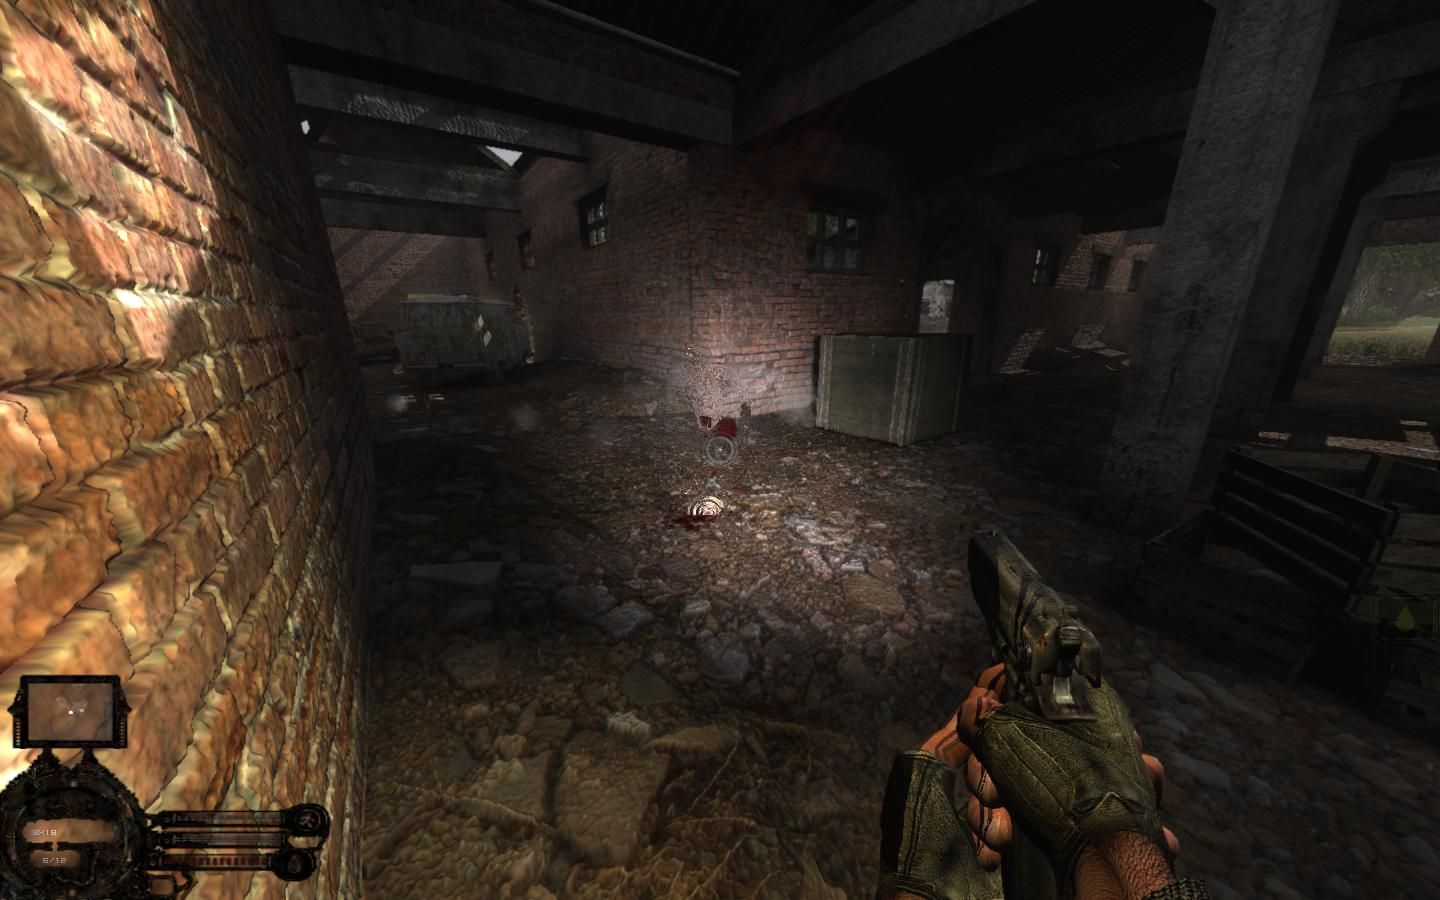 S.T.A.L.K.E.R.: Shadow of Chernobyl -   2 (2015/RUS/RePack) PC